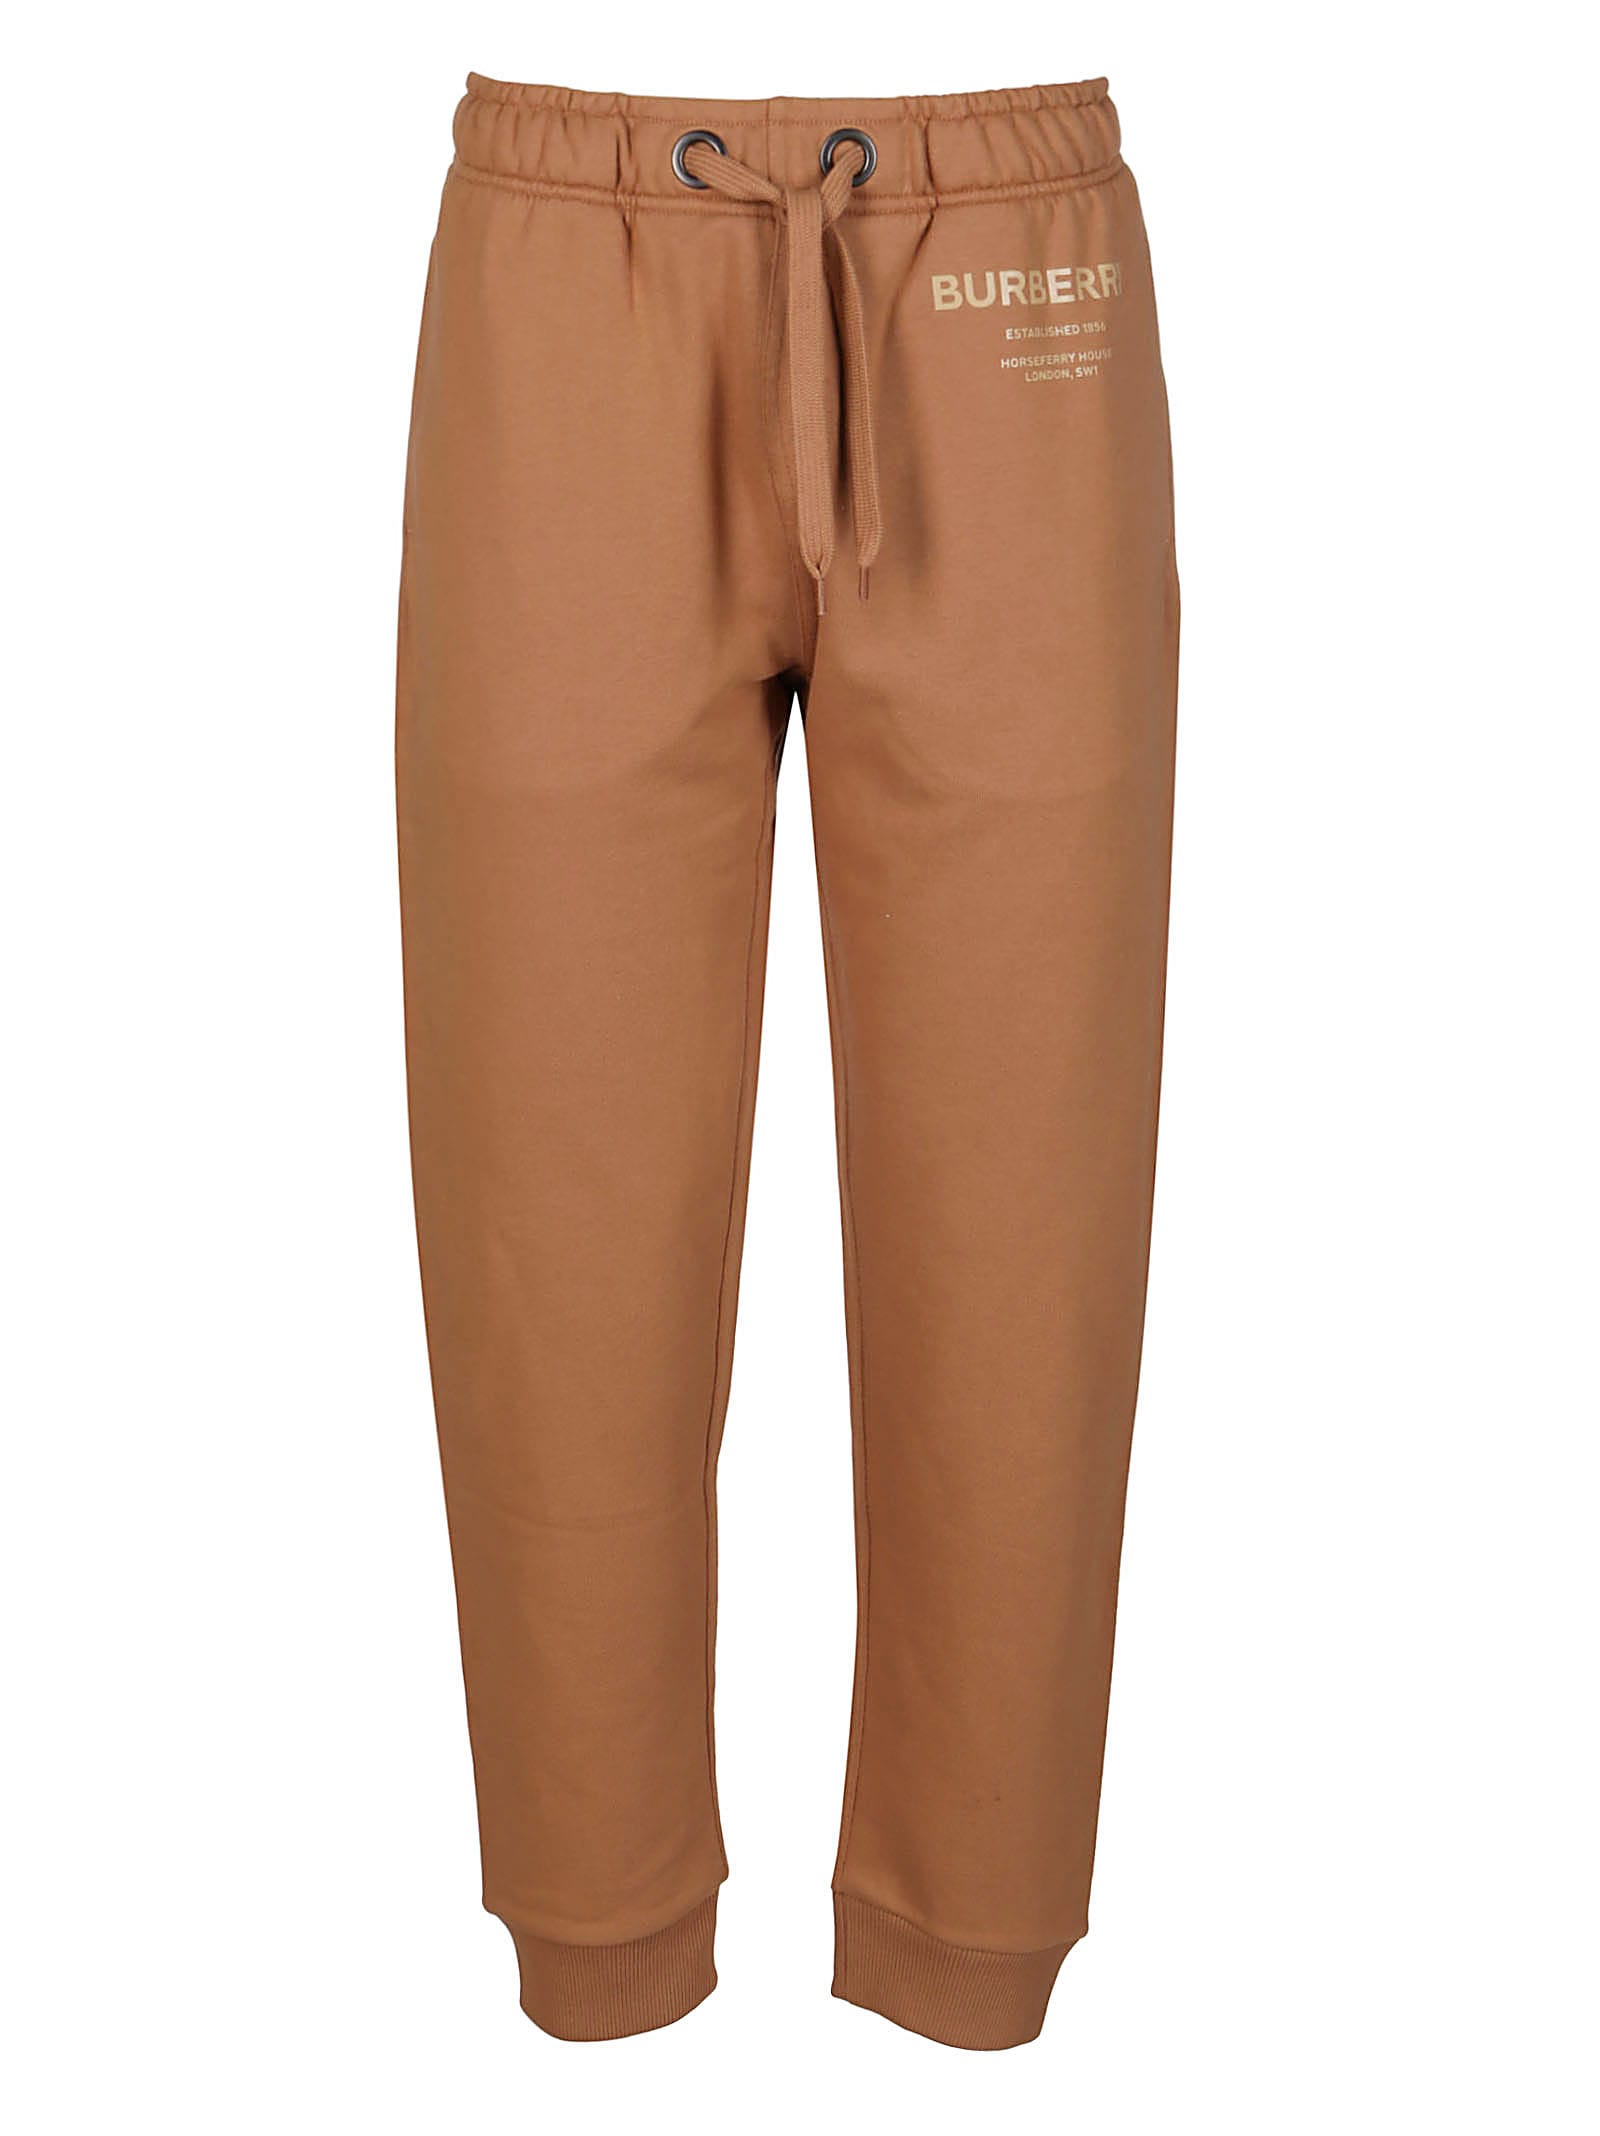 Burberry Brown Cotton Track Pants